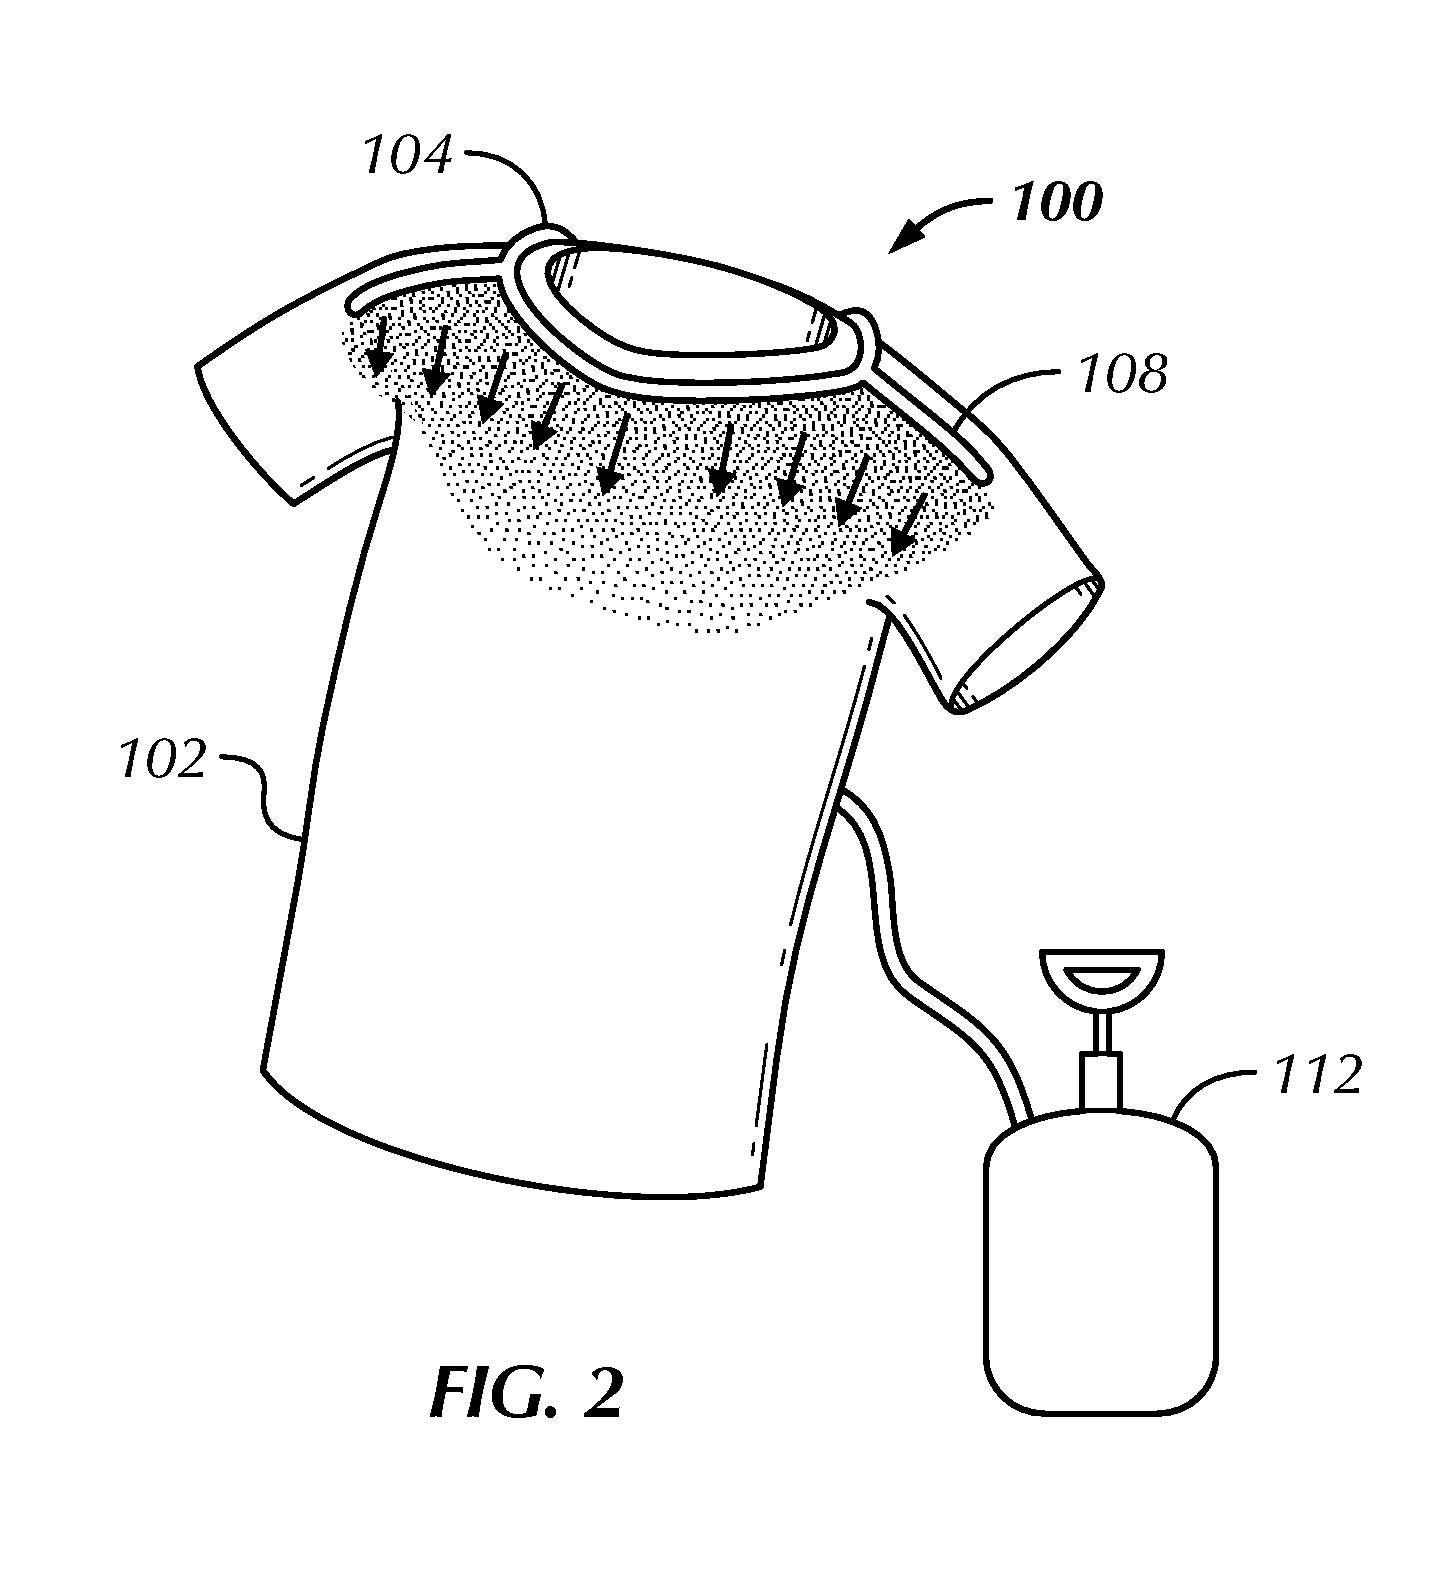 Evaporative cooling clothing system for reducing body temperature of a wearer of the clothing system